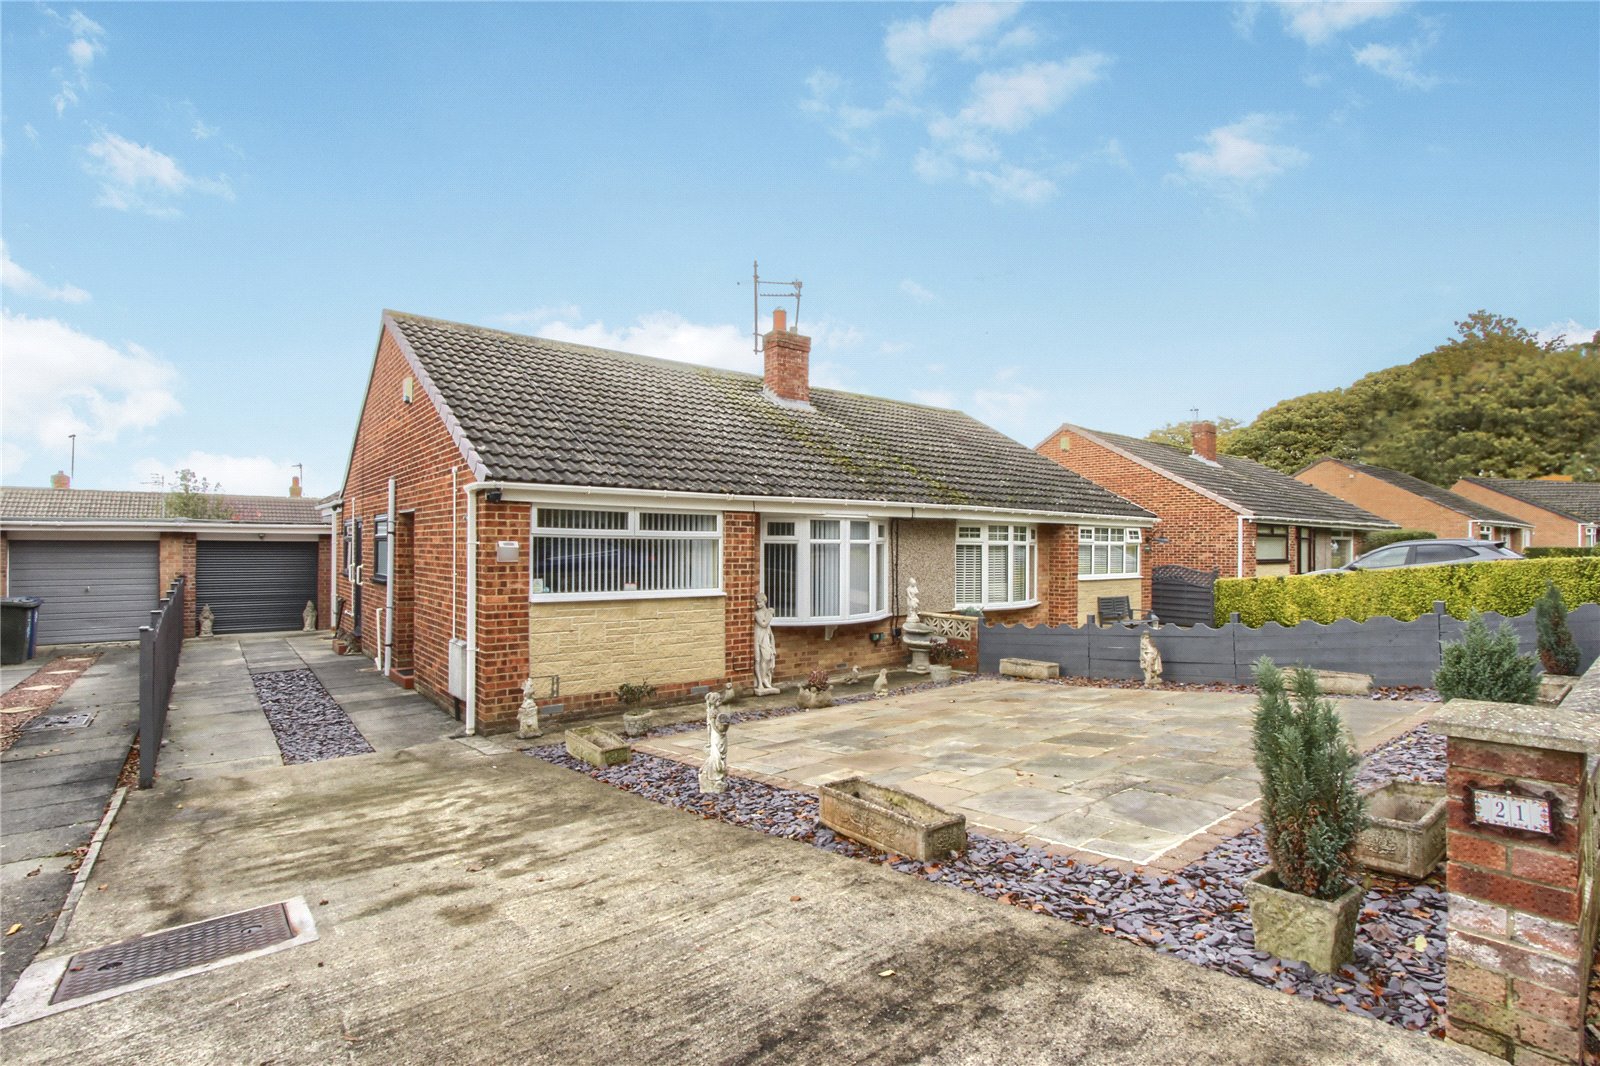 2 bed bungalow for sale in Greenside, Normanby 1